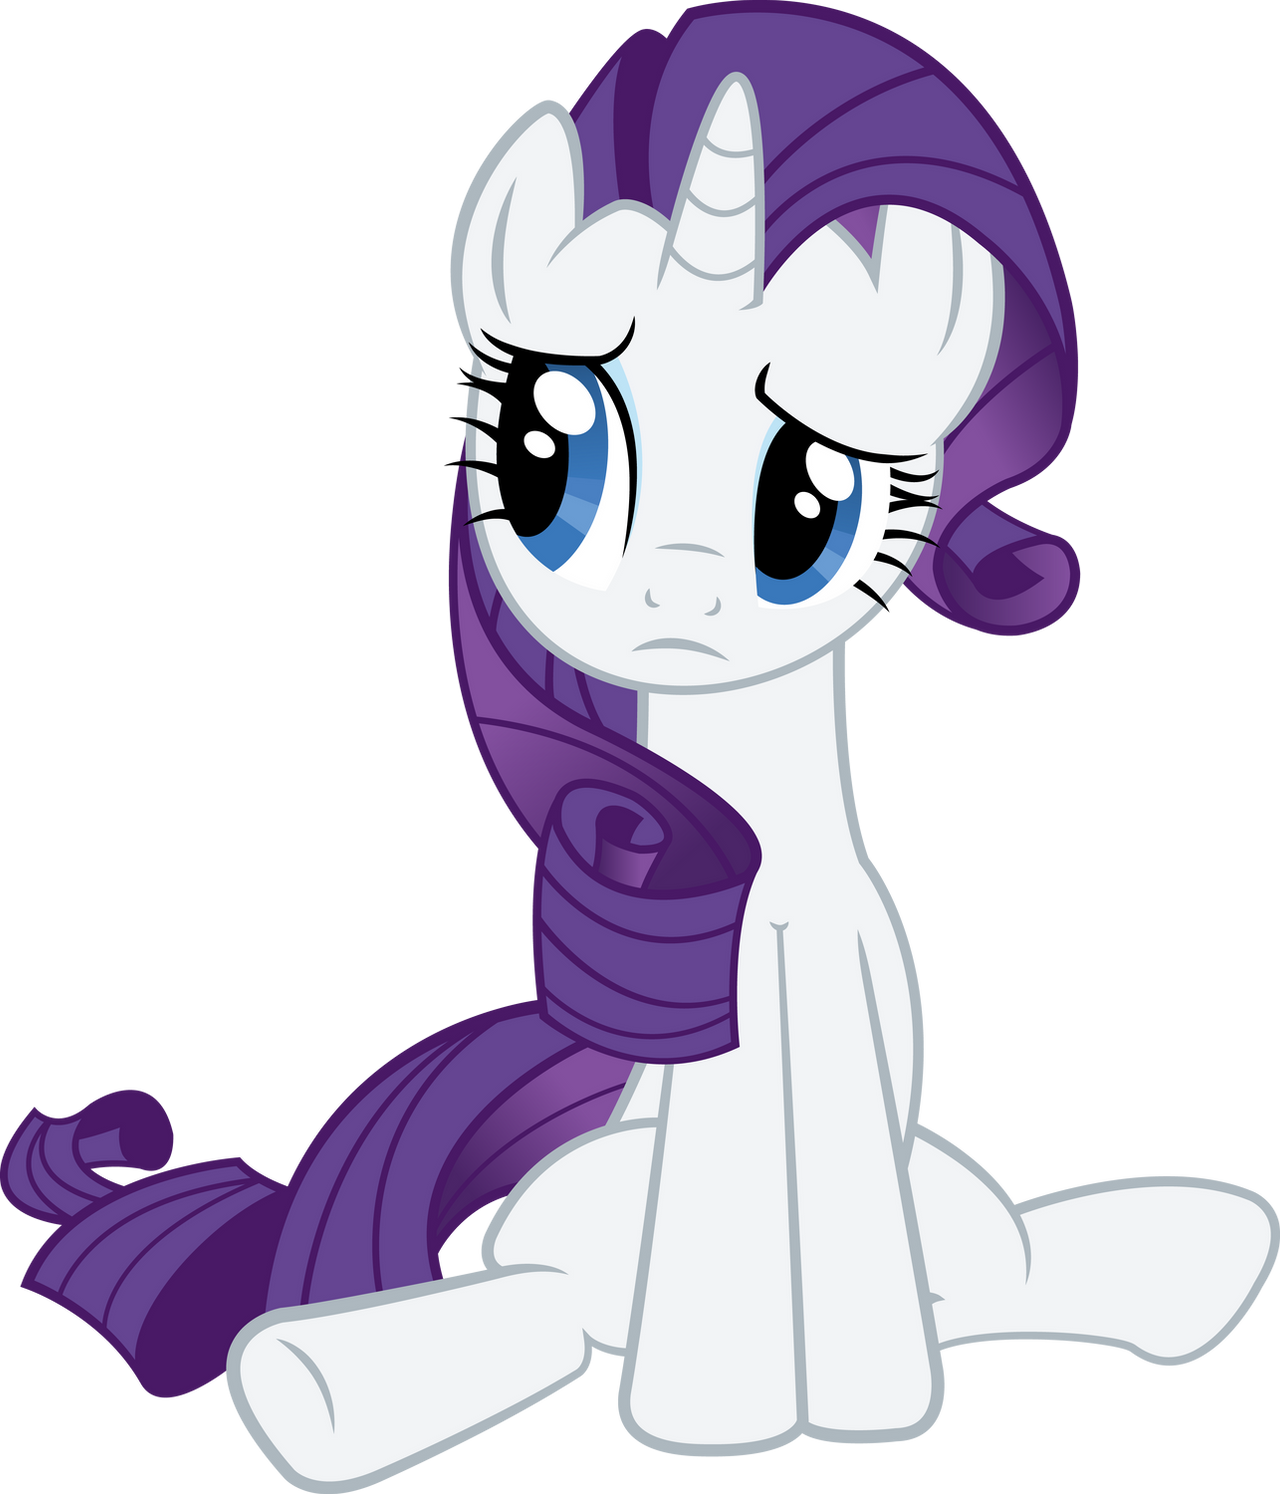 Rarity getting rejected